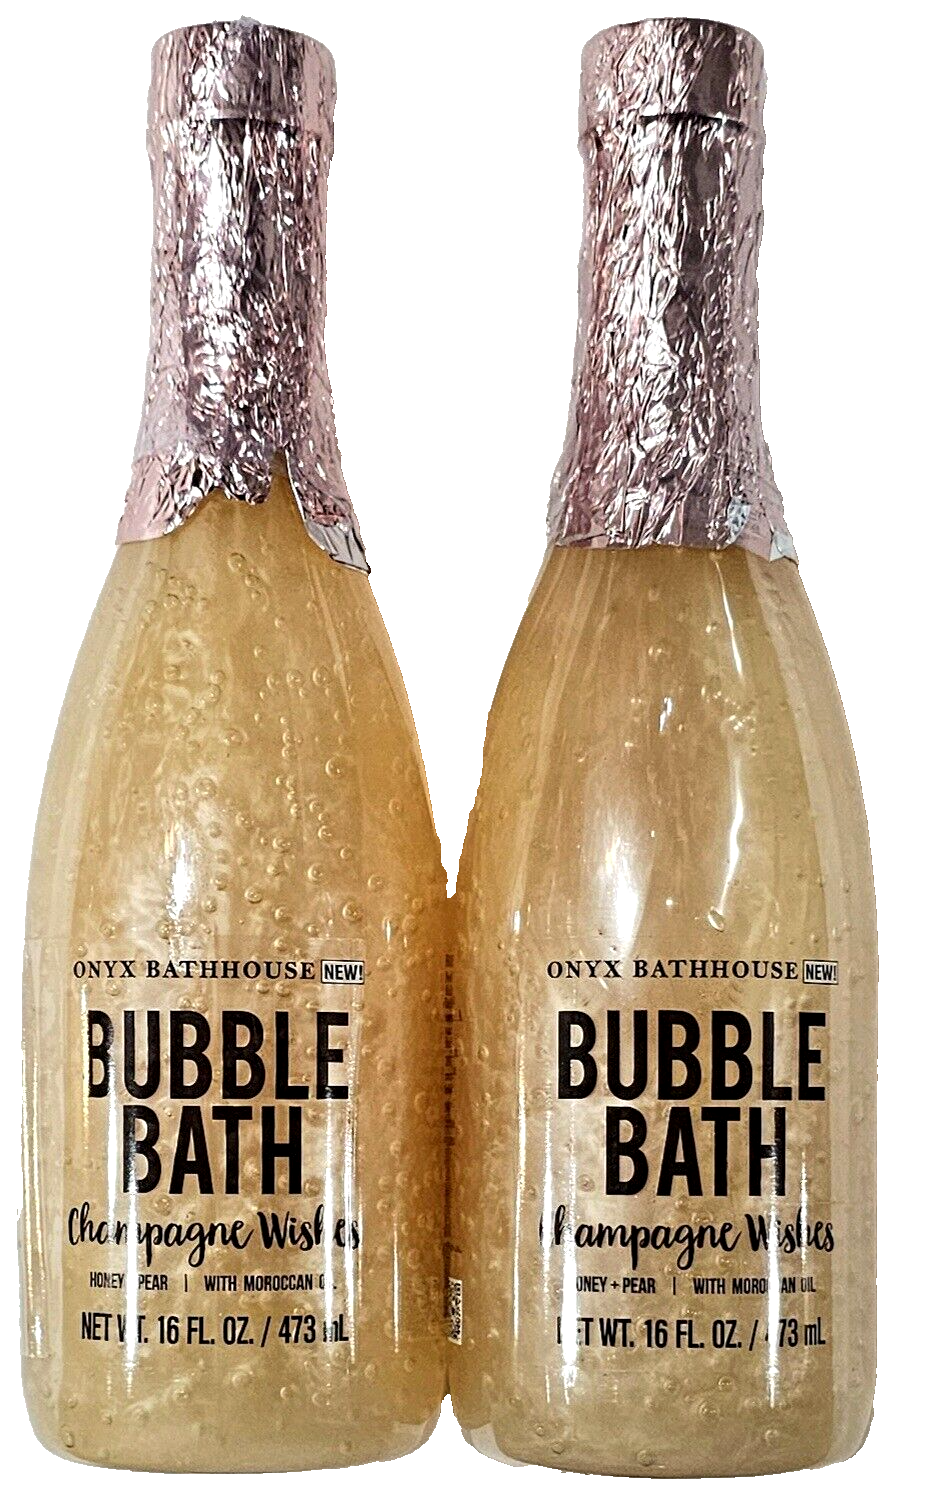 Primary image for 2 Pack Onyx Bathhouse Bubble Bath Champagne Wishes Honey Pear Moroccan Oil 16oz